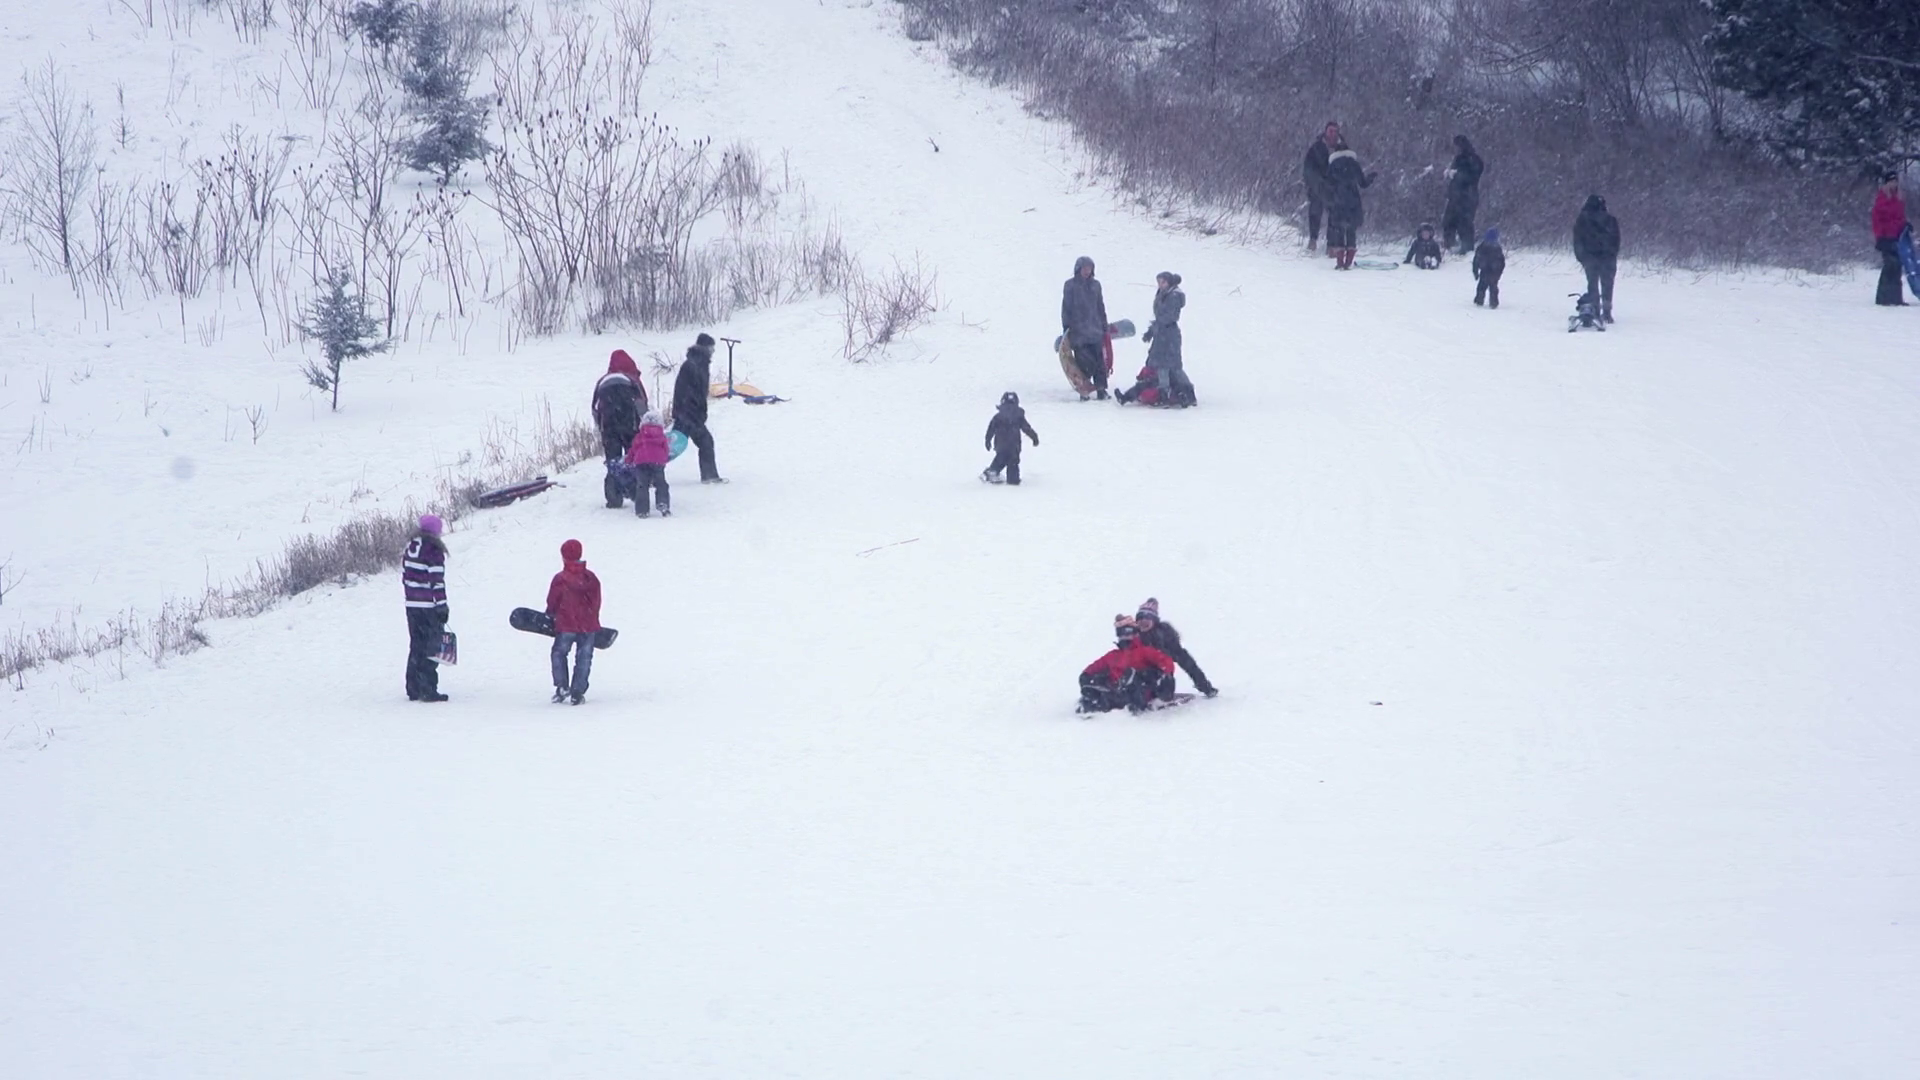 Kids and adults enjoying a small ski hill on a snowy day in suburban ...